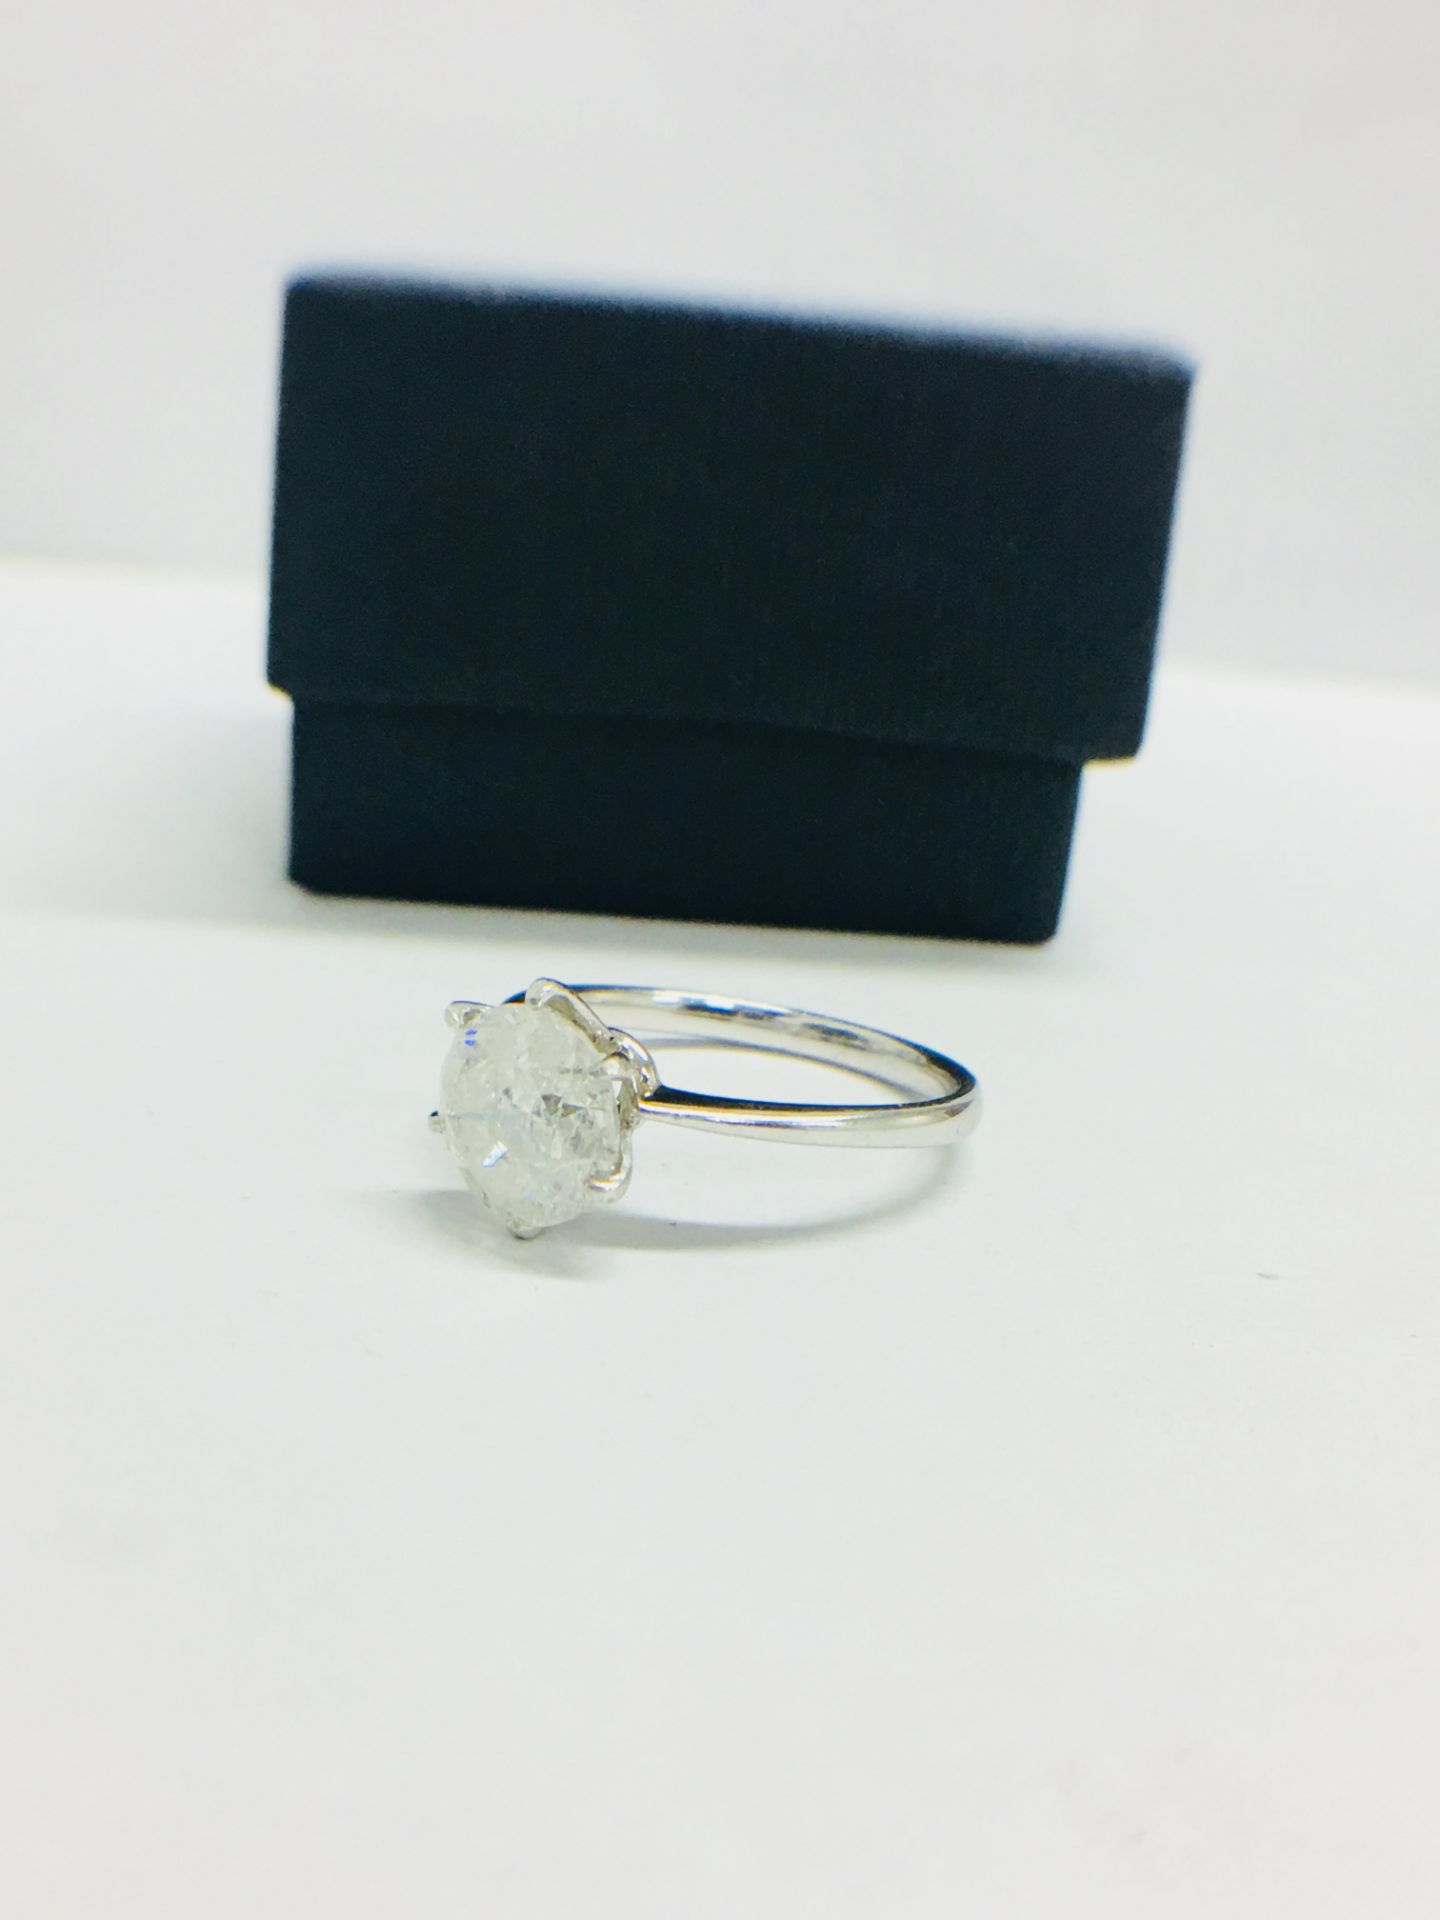 2.04ct diamond solitaire ring set in Platinum setting. H colour and I1 clarity. High 4 claw setting, - Image 2 of 9